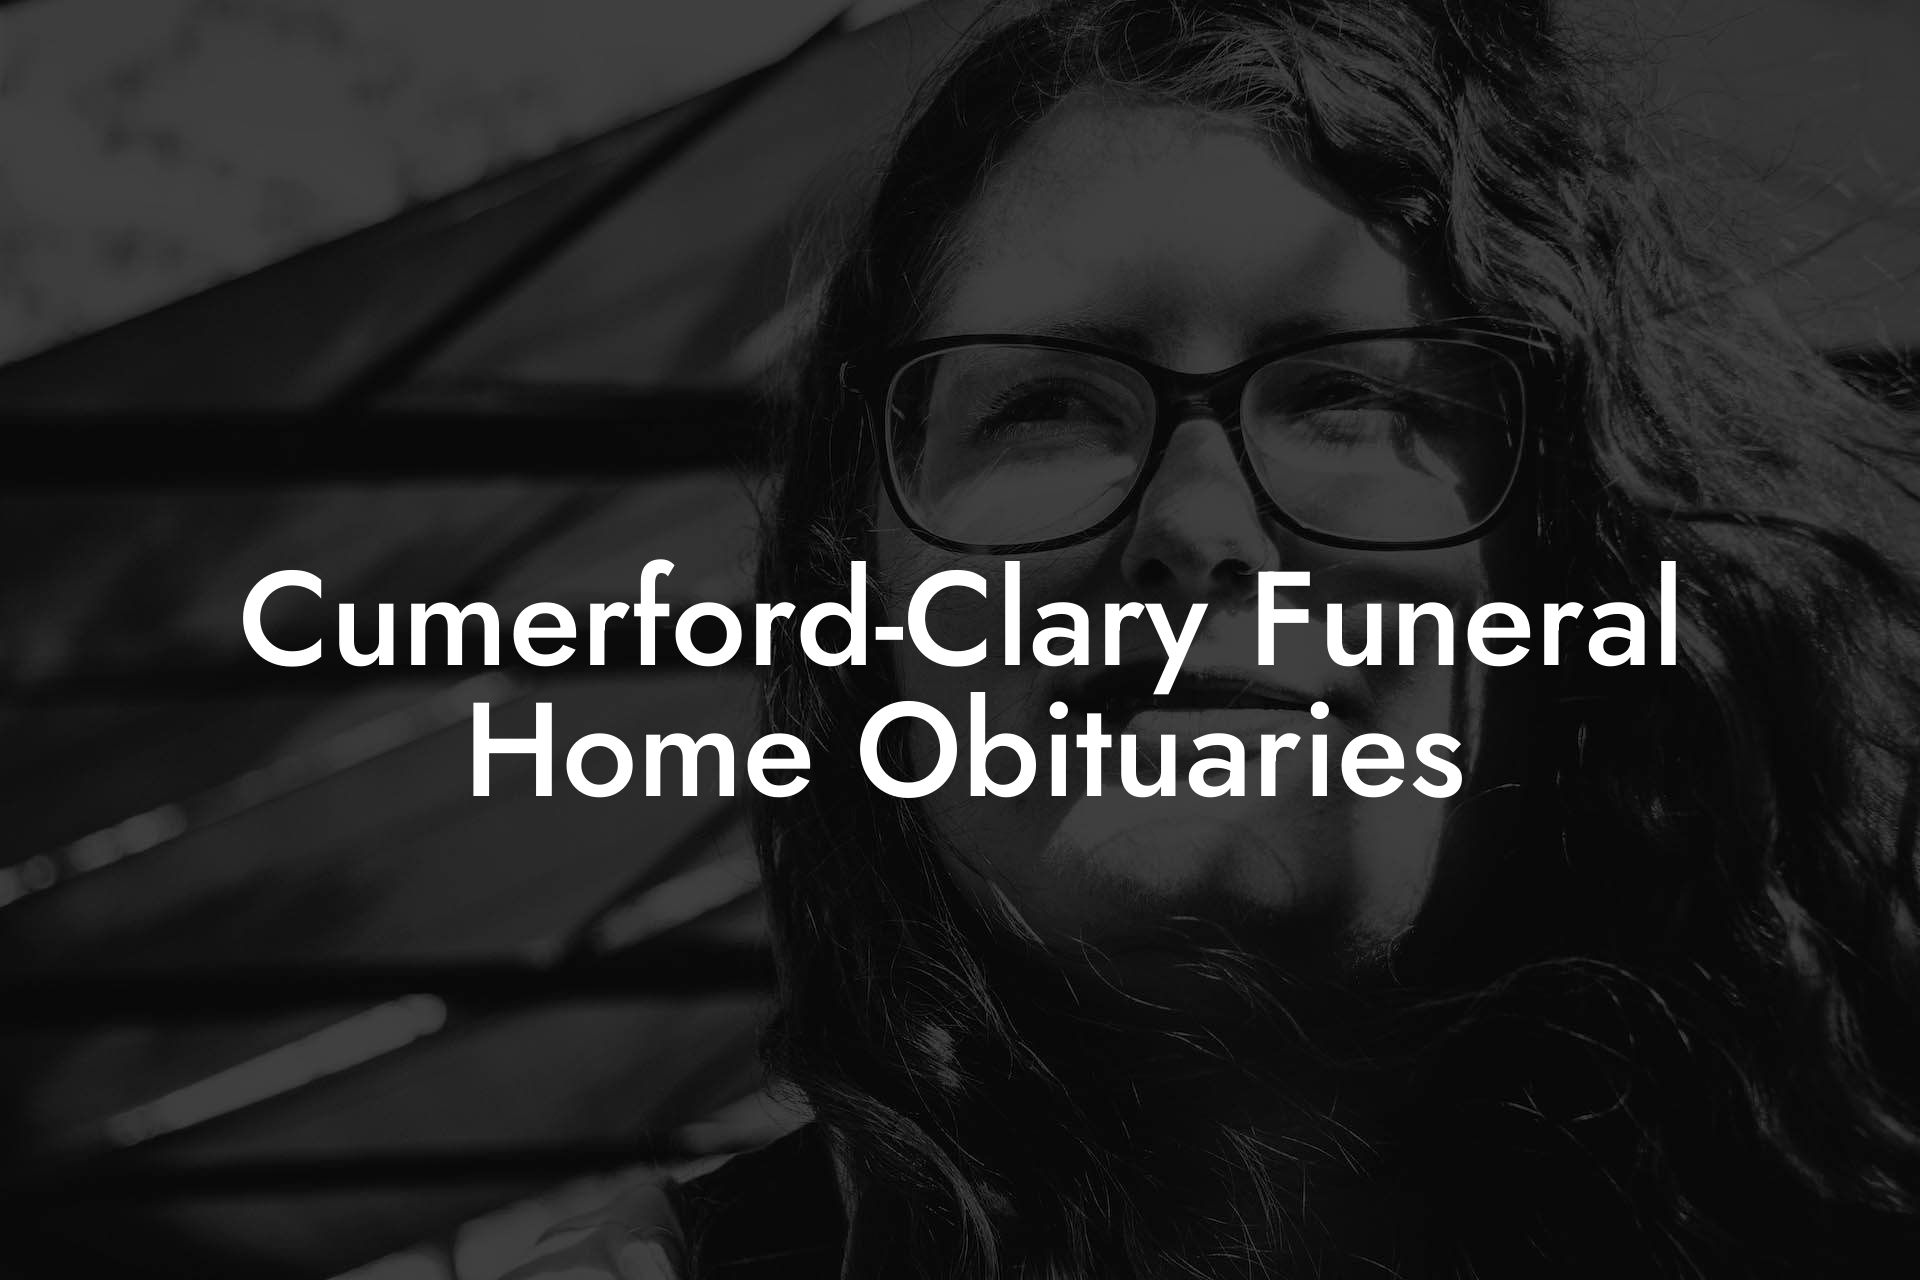 Cumerford-Clary Funeral Home Obituaries